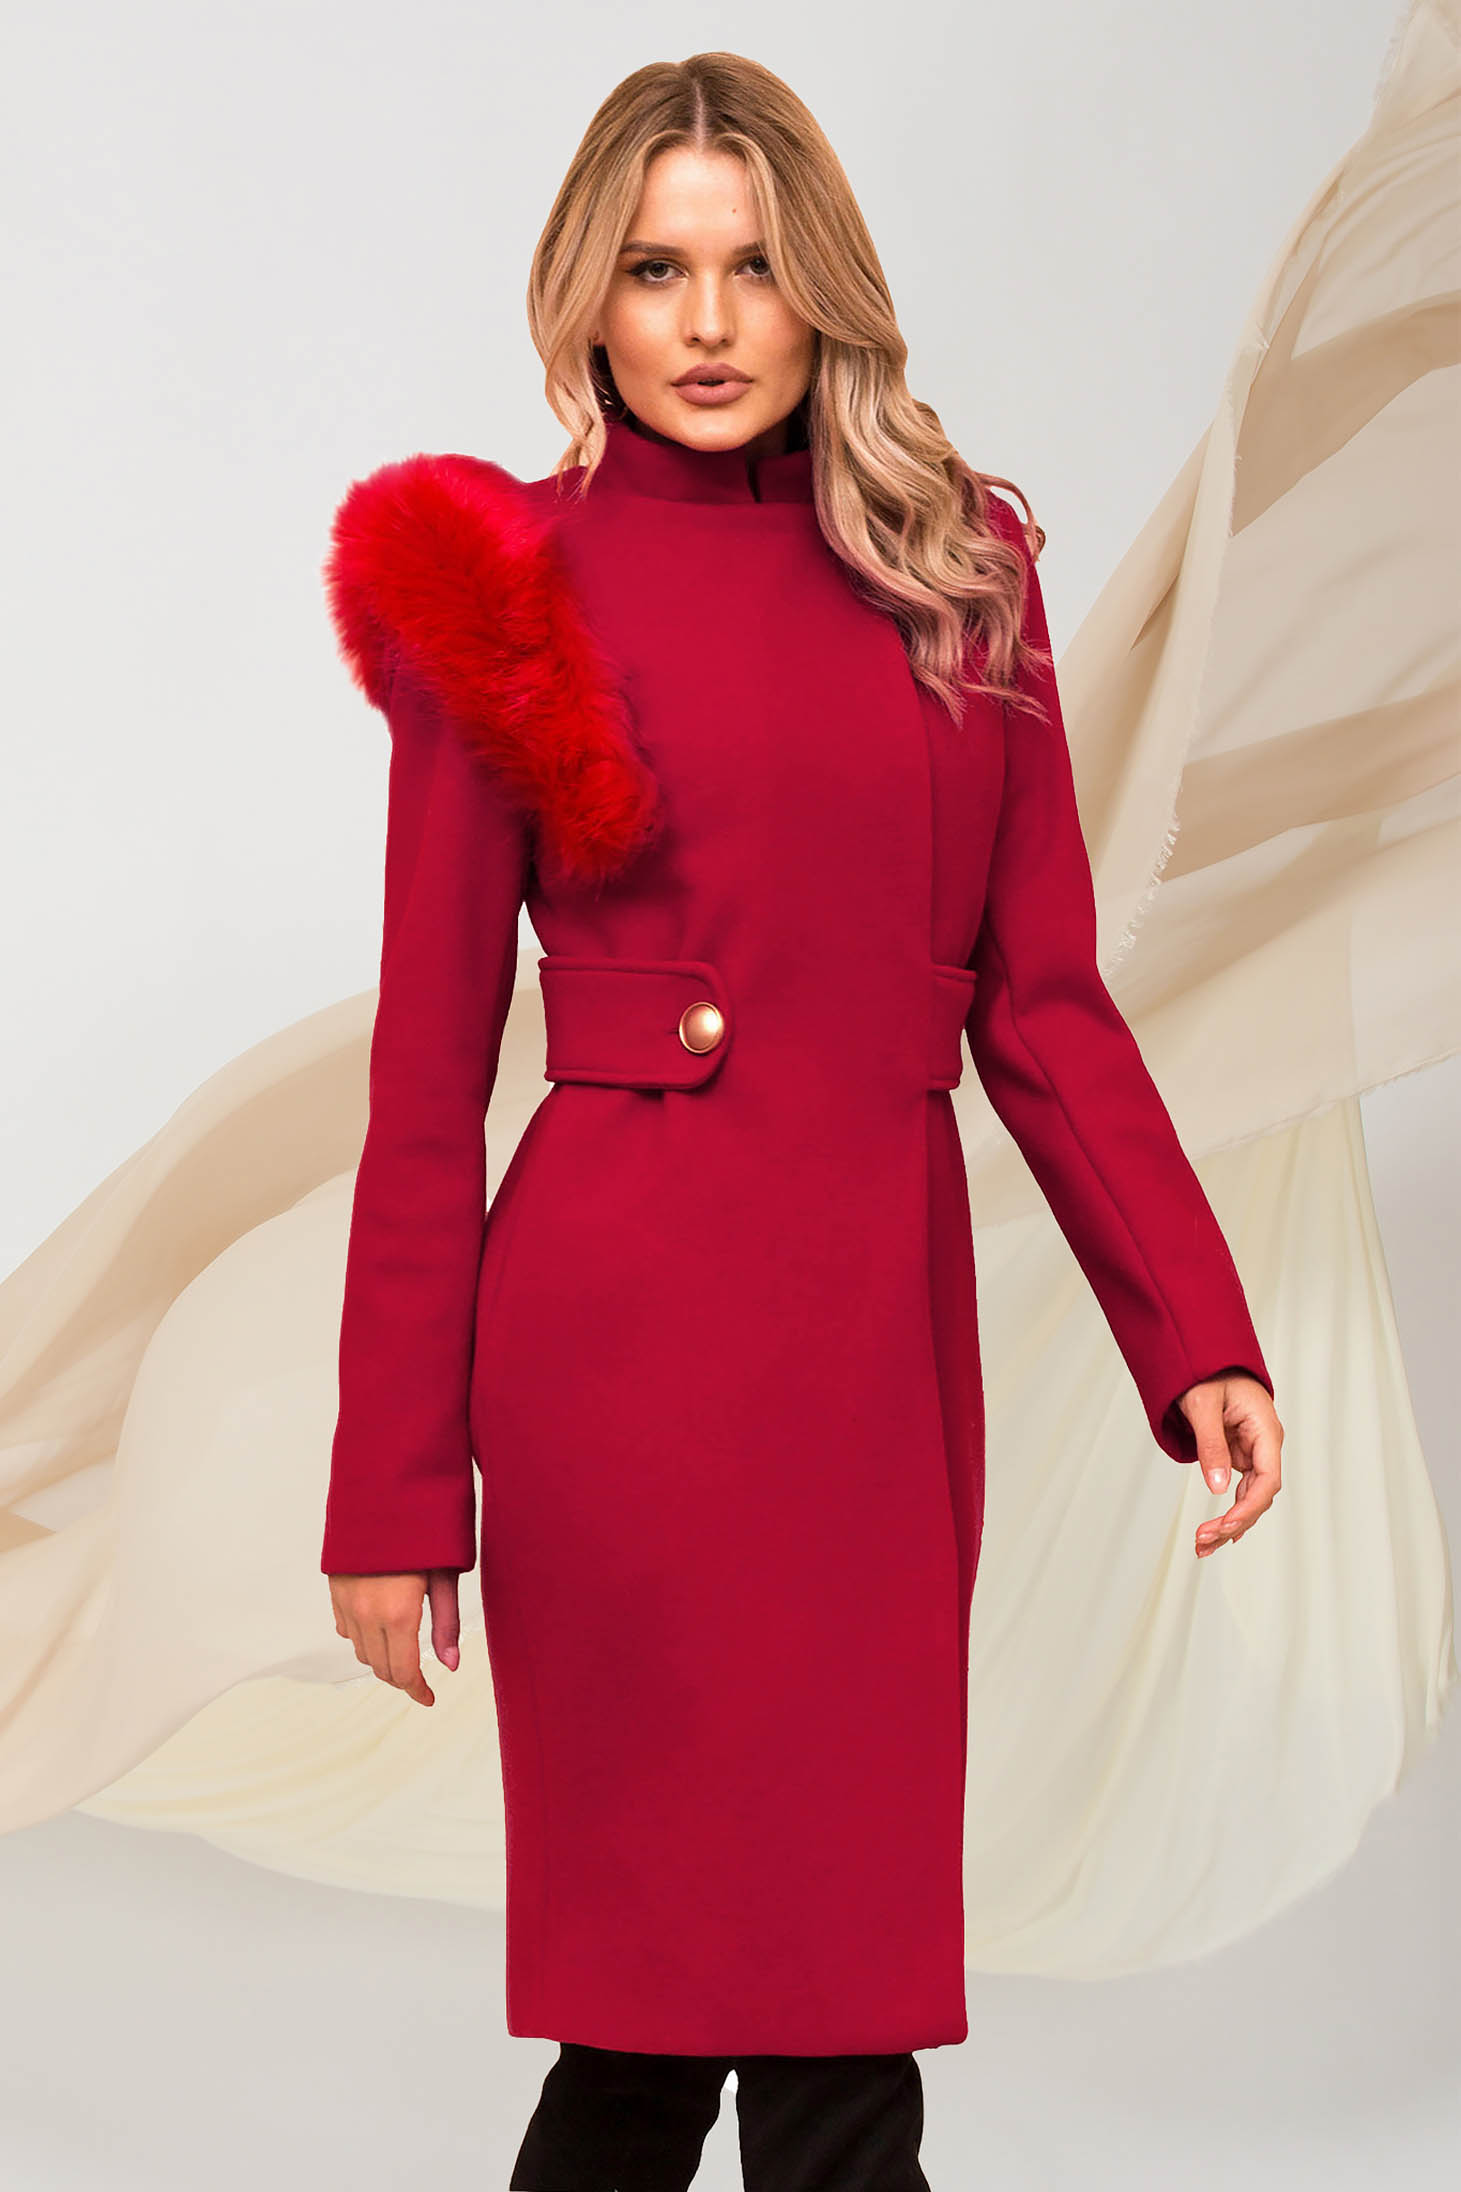 Coat burgundy cloth with faux fur details accessorized with tied waistband